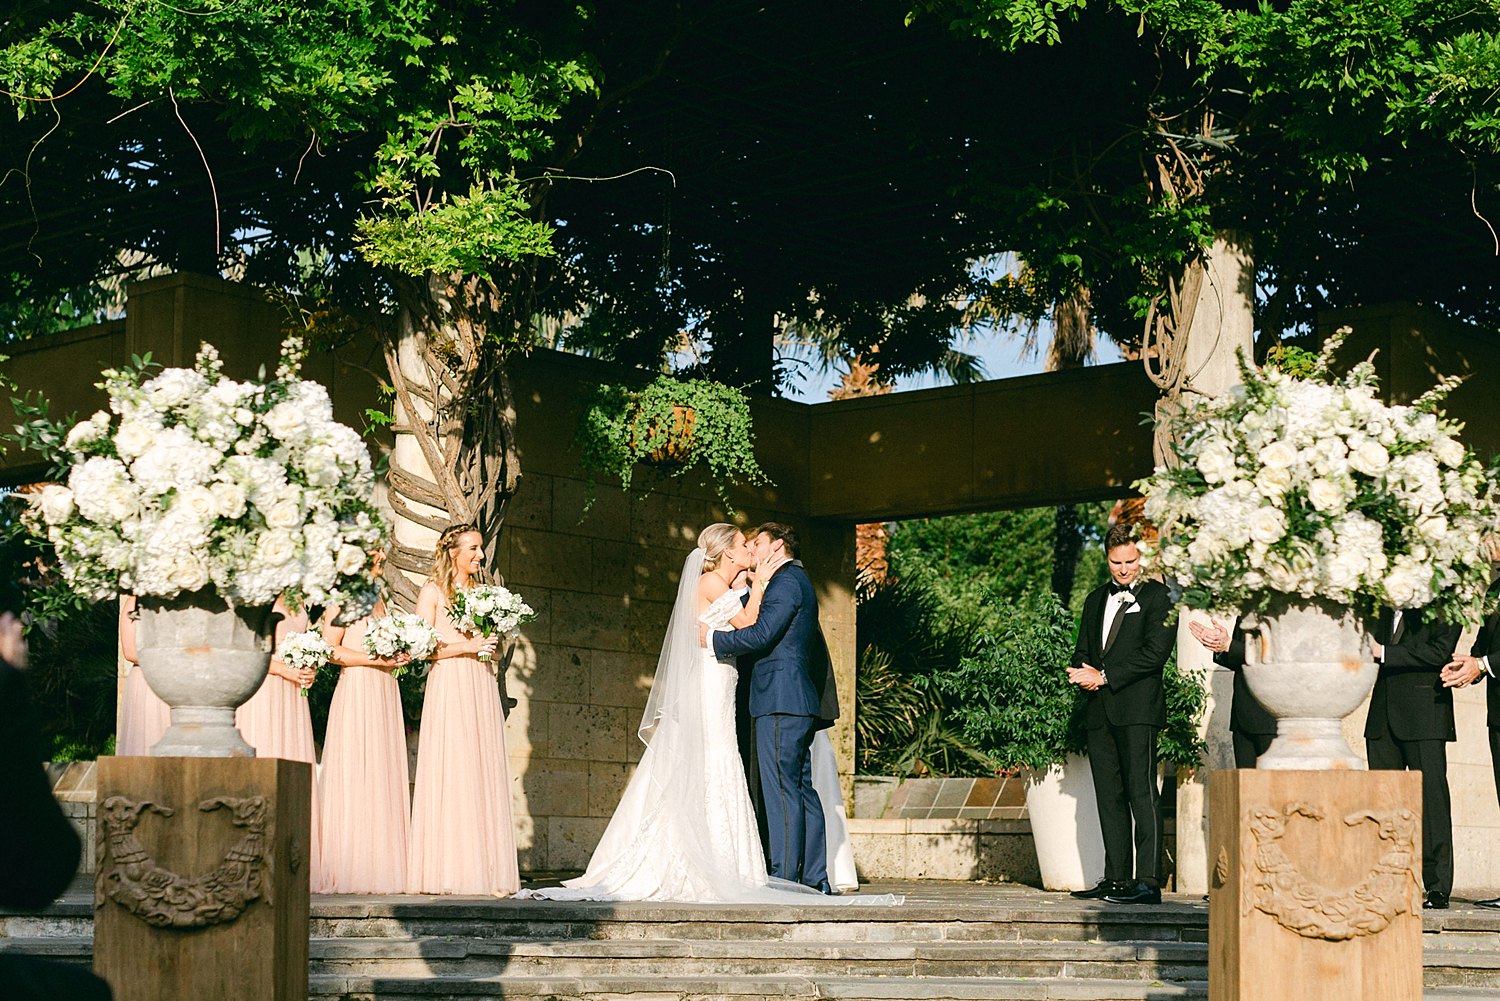 Bride and groom first kiss at ceremony altar Dallas Arboretum wedding